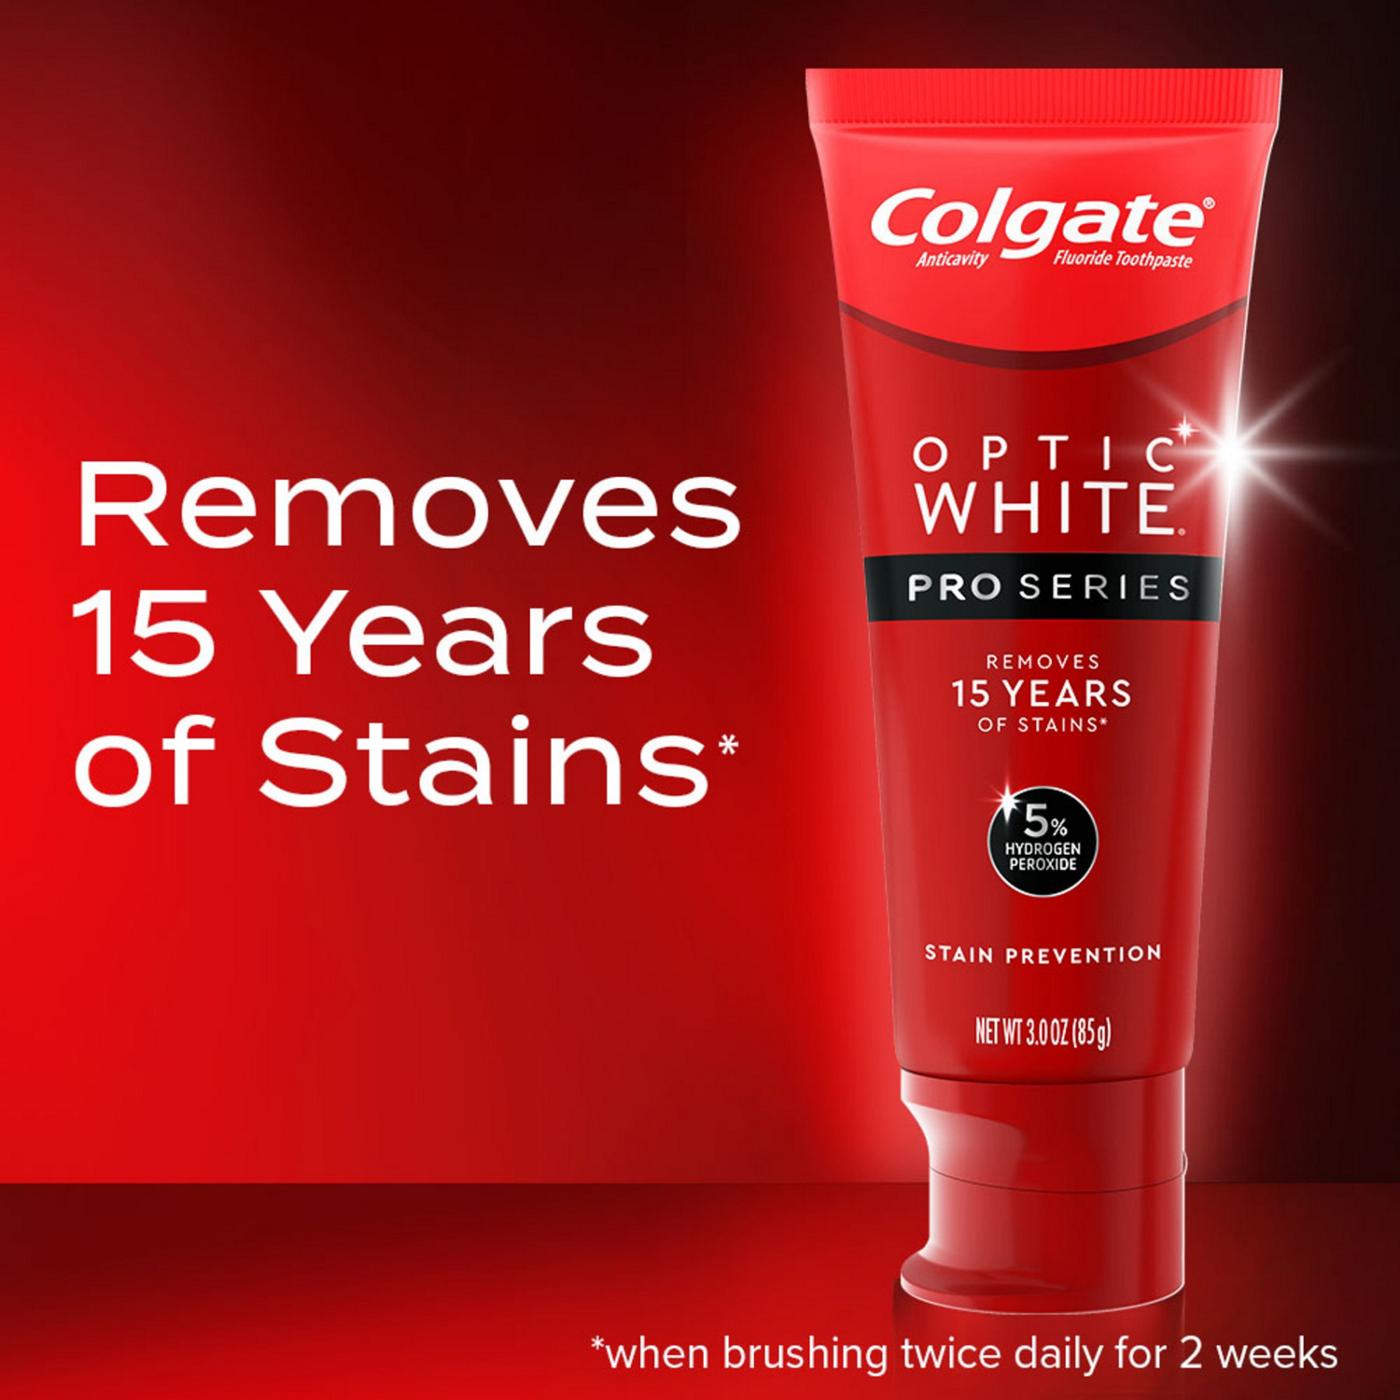 Colgate Optic White Pro Series Anticavity Toothpaste - Stain Prevention; image 6 of 8